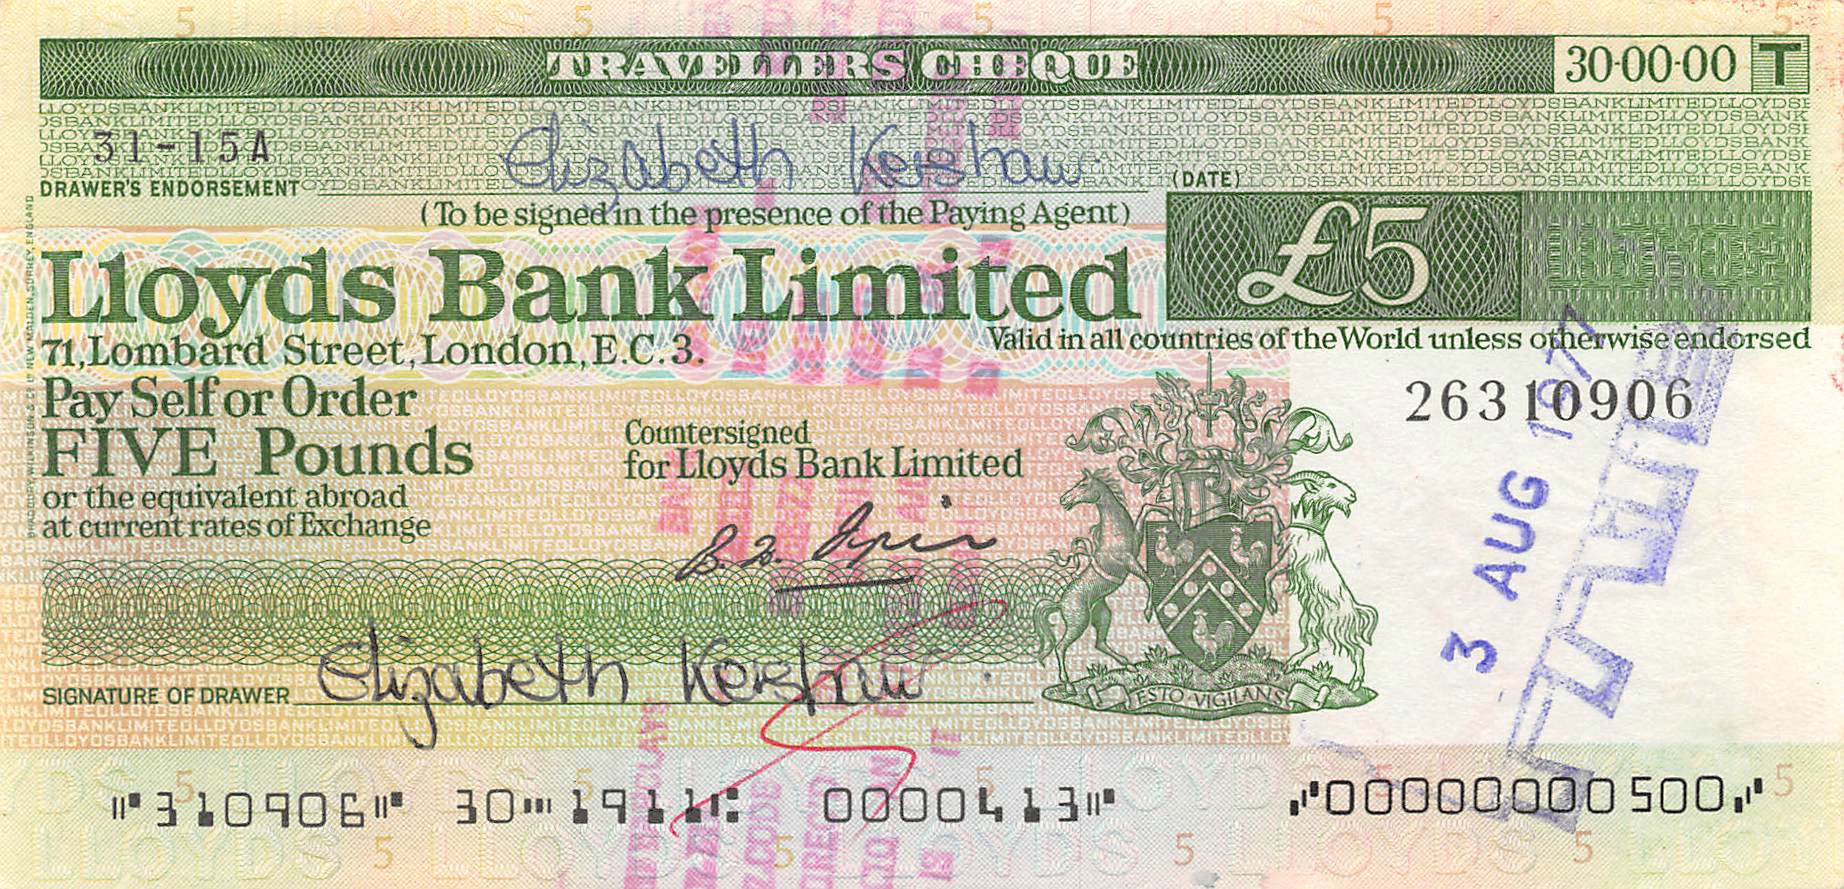 travellers cheques lloyds bank